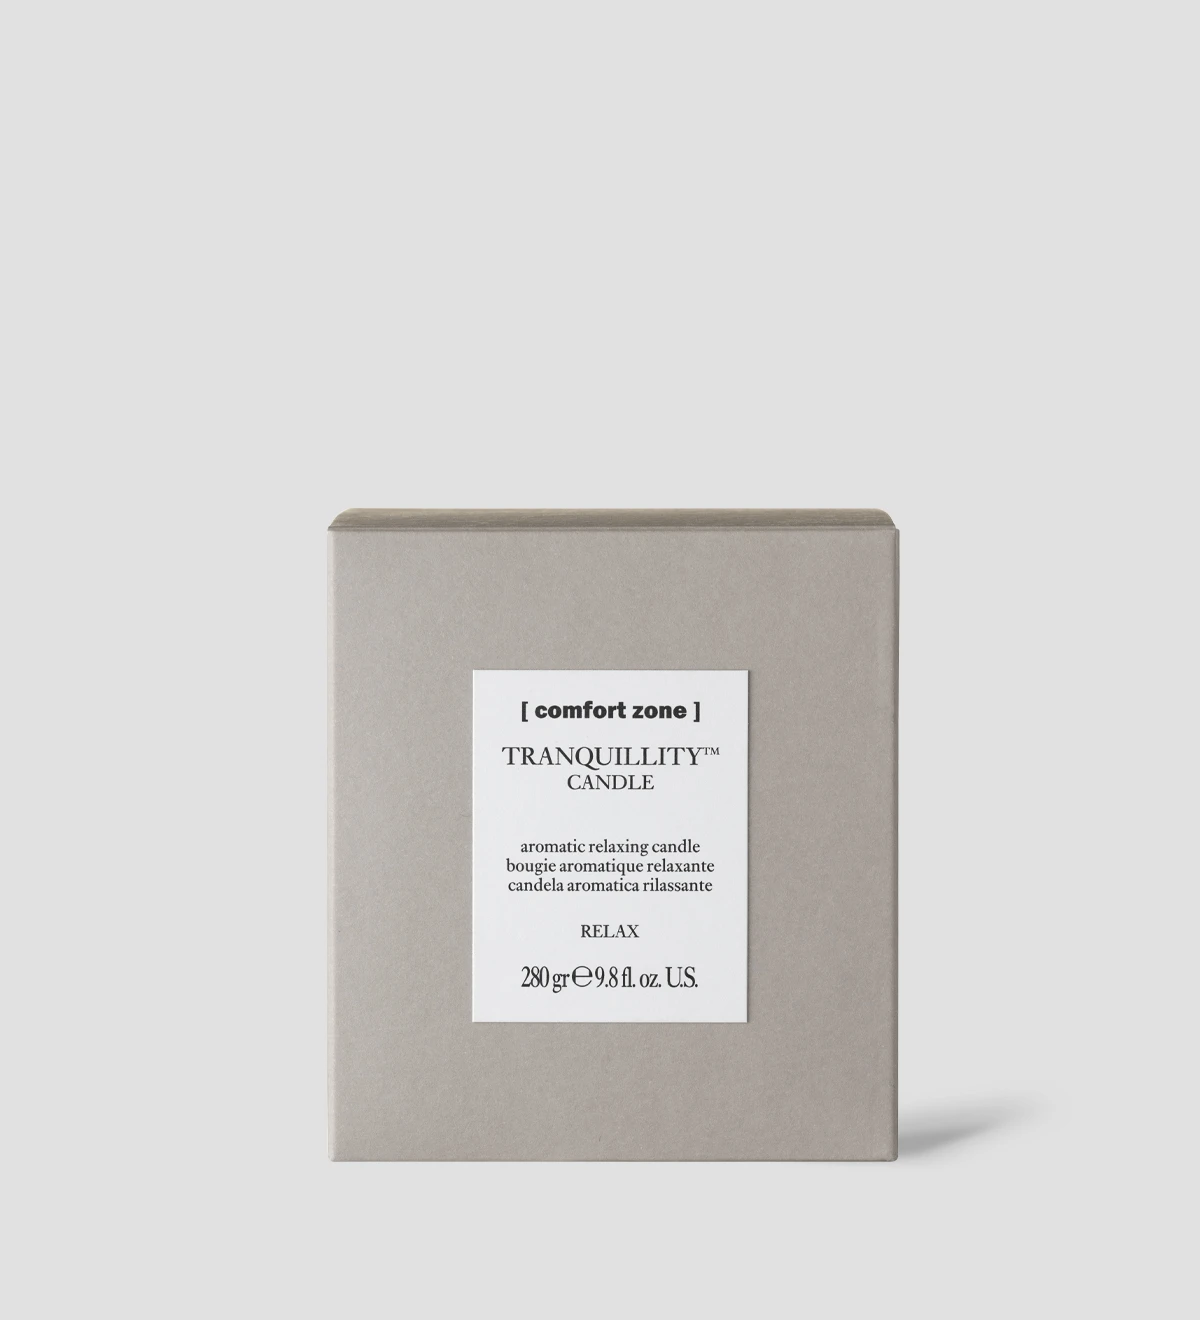 Tranquillity Candle 280gr Comfort Zone